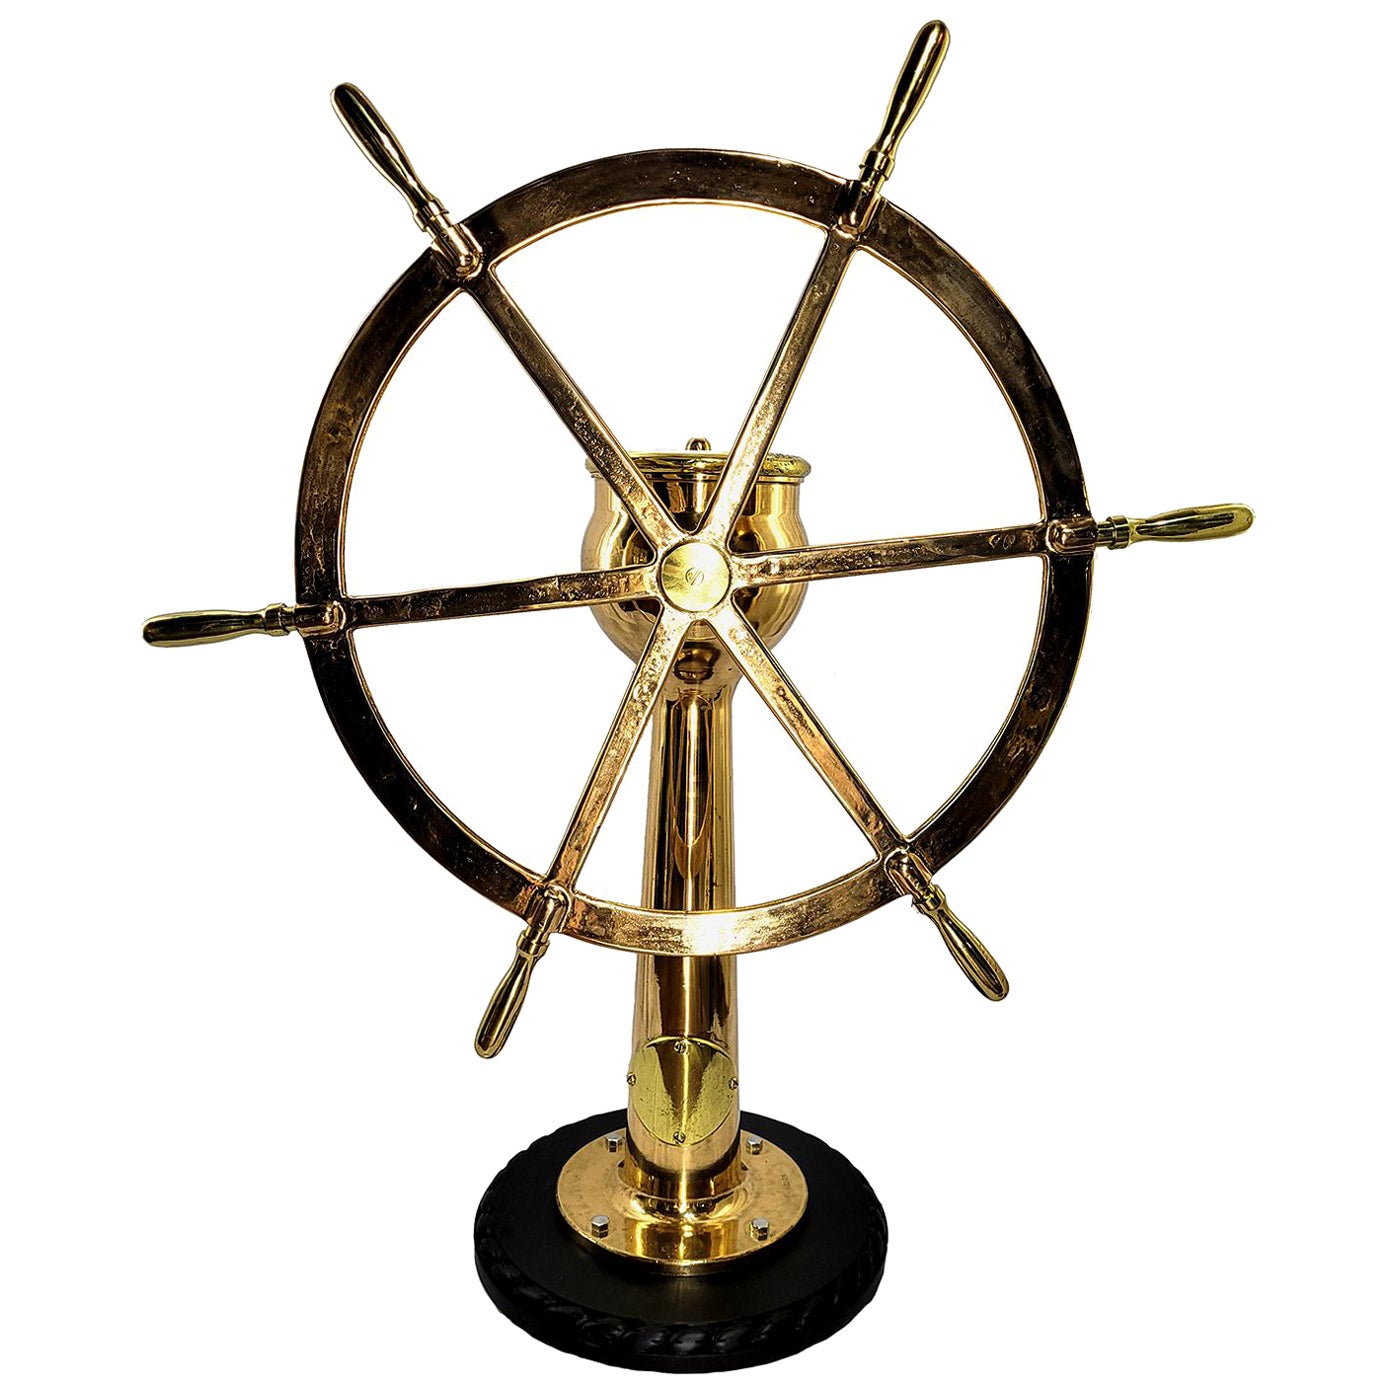 Six Spoke Solid Brass Ships Wheel on Stand For Sale